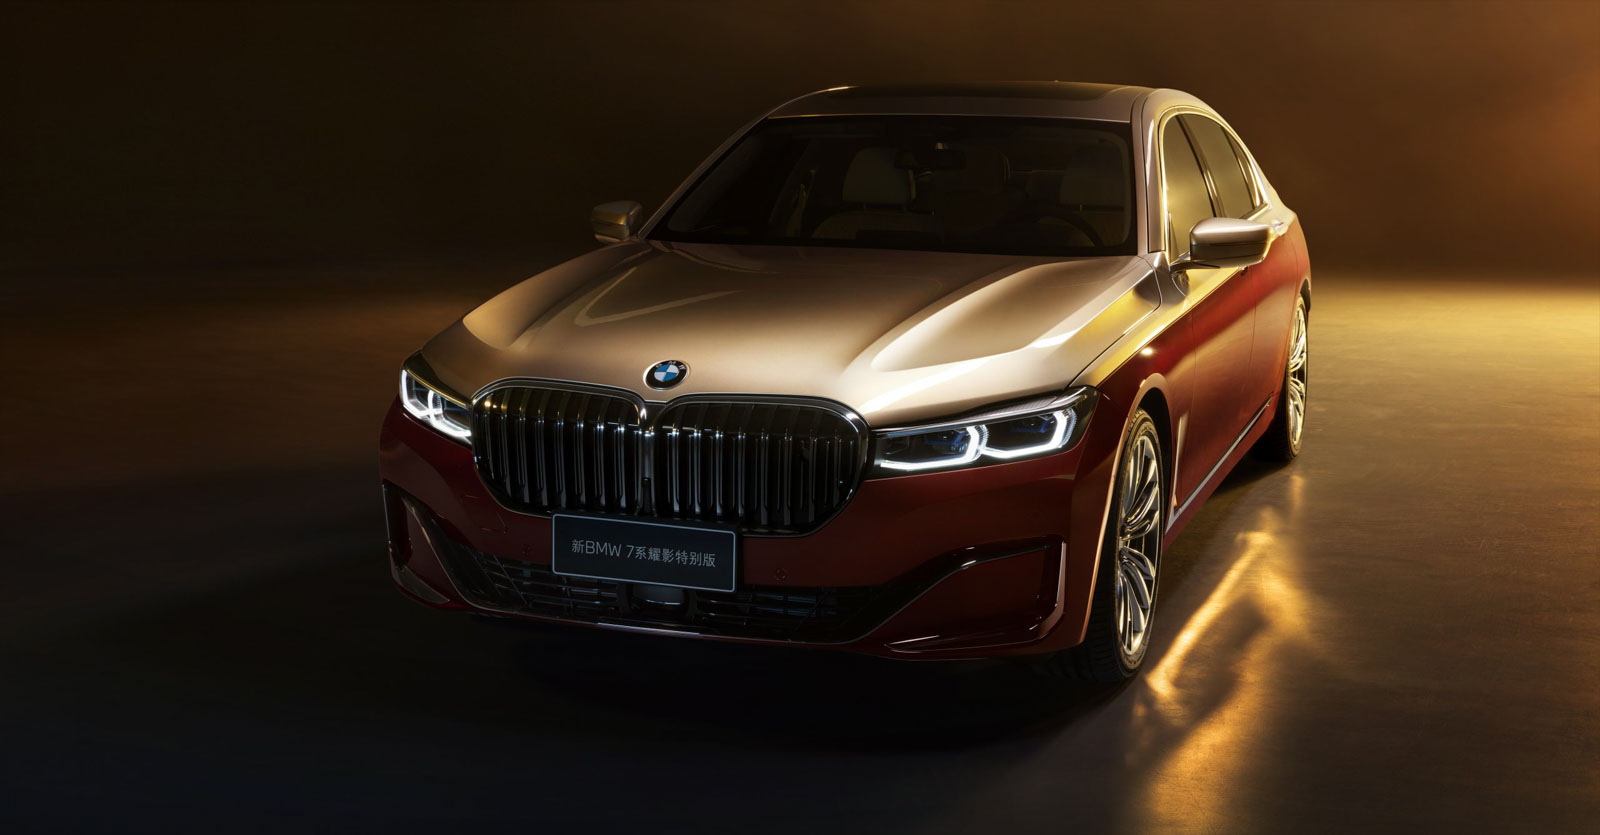 BMW 7 Series TwoTone Special Edition Unveiled; Limited To Just 25 Units